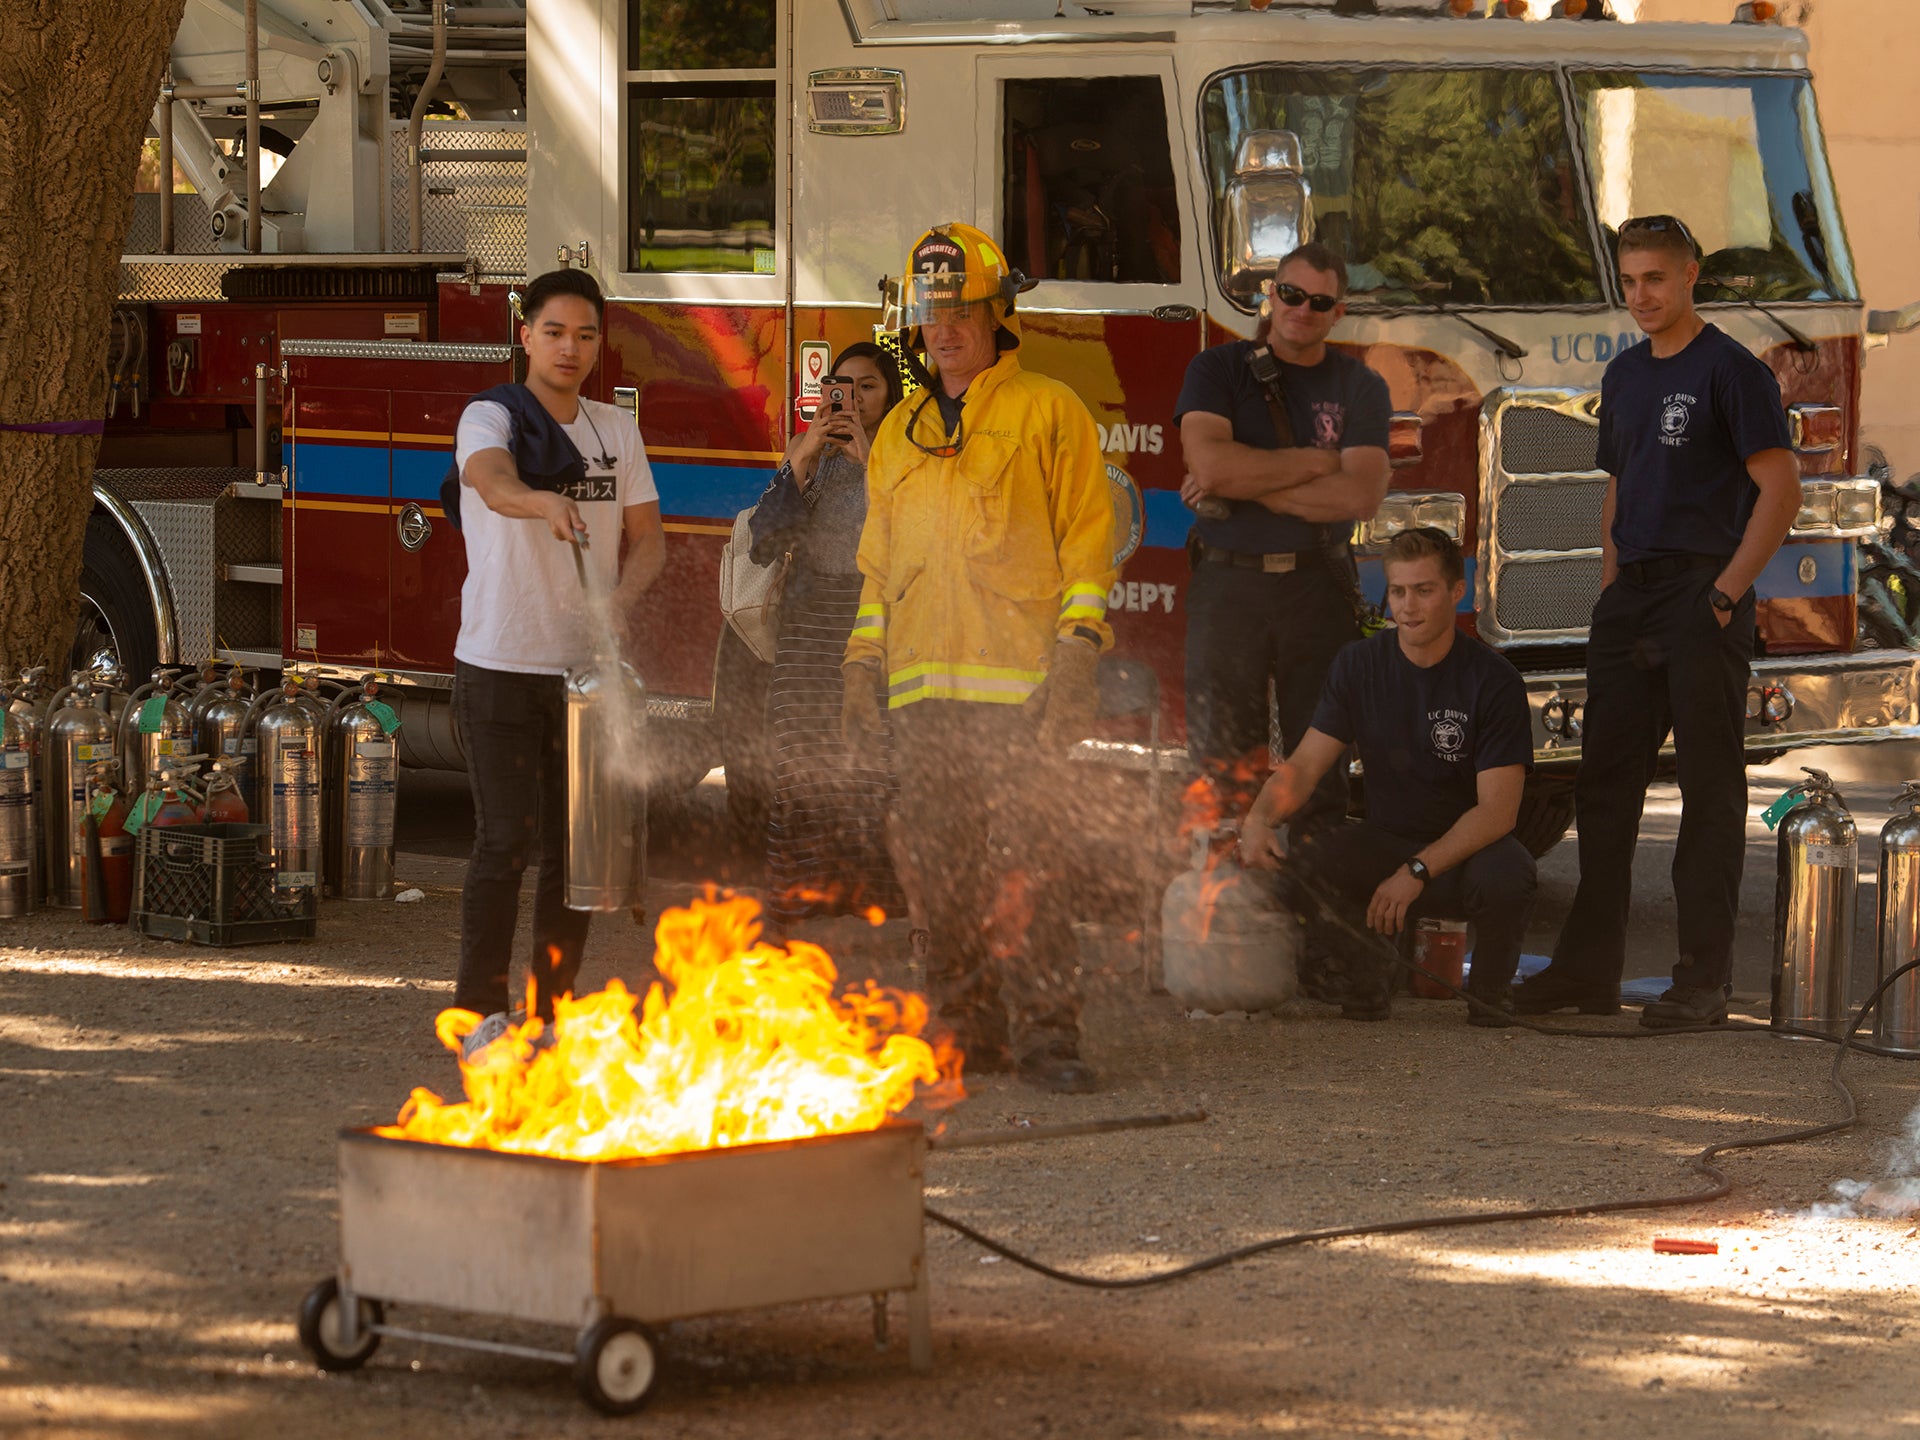 A UC Davis student extinguishes a bin fire while students and firefighters watch. A firetruck is in the background.